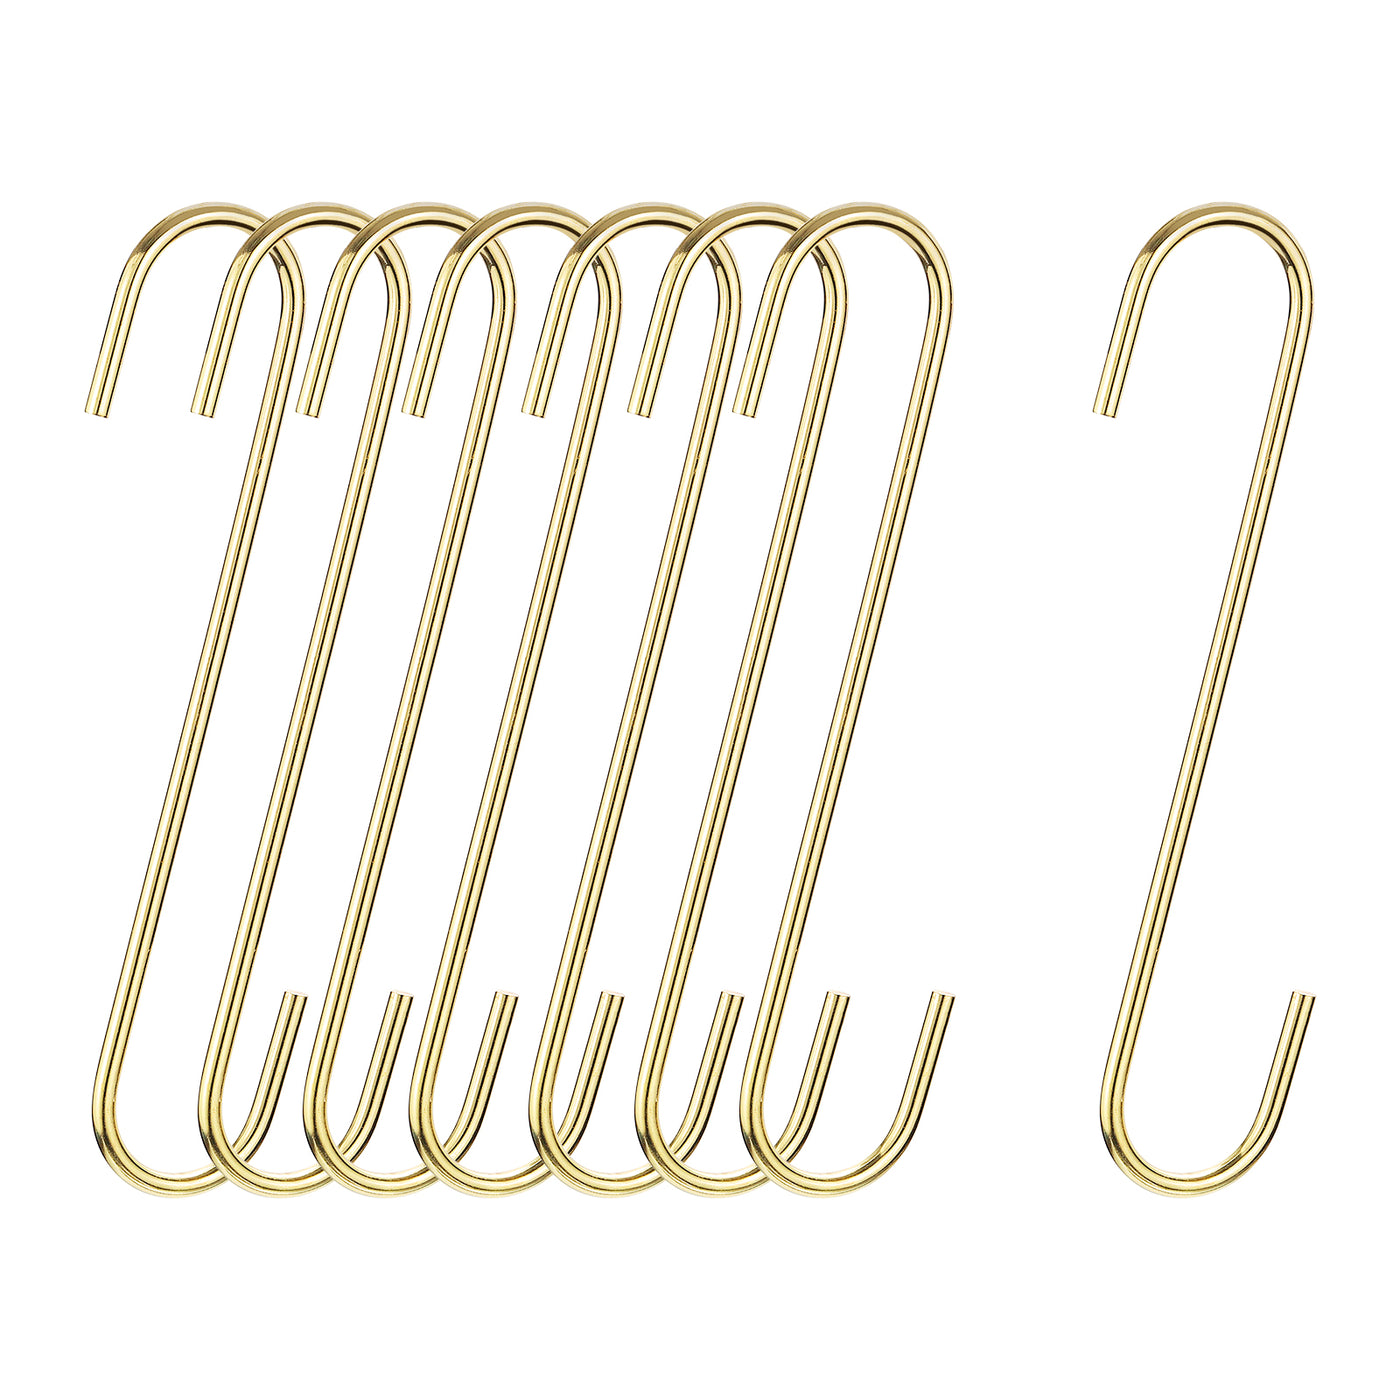 uxcell Uxcell S Hanging Hooks, 8inch(200mm) Extra Long Steel Hanger, Indoor Outdoor Uses for Garden, Bathroom, Closet, Workshop, Kitchen, Gold Tone, 8Pcs